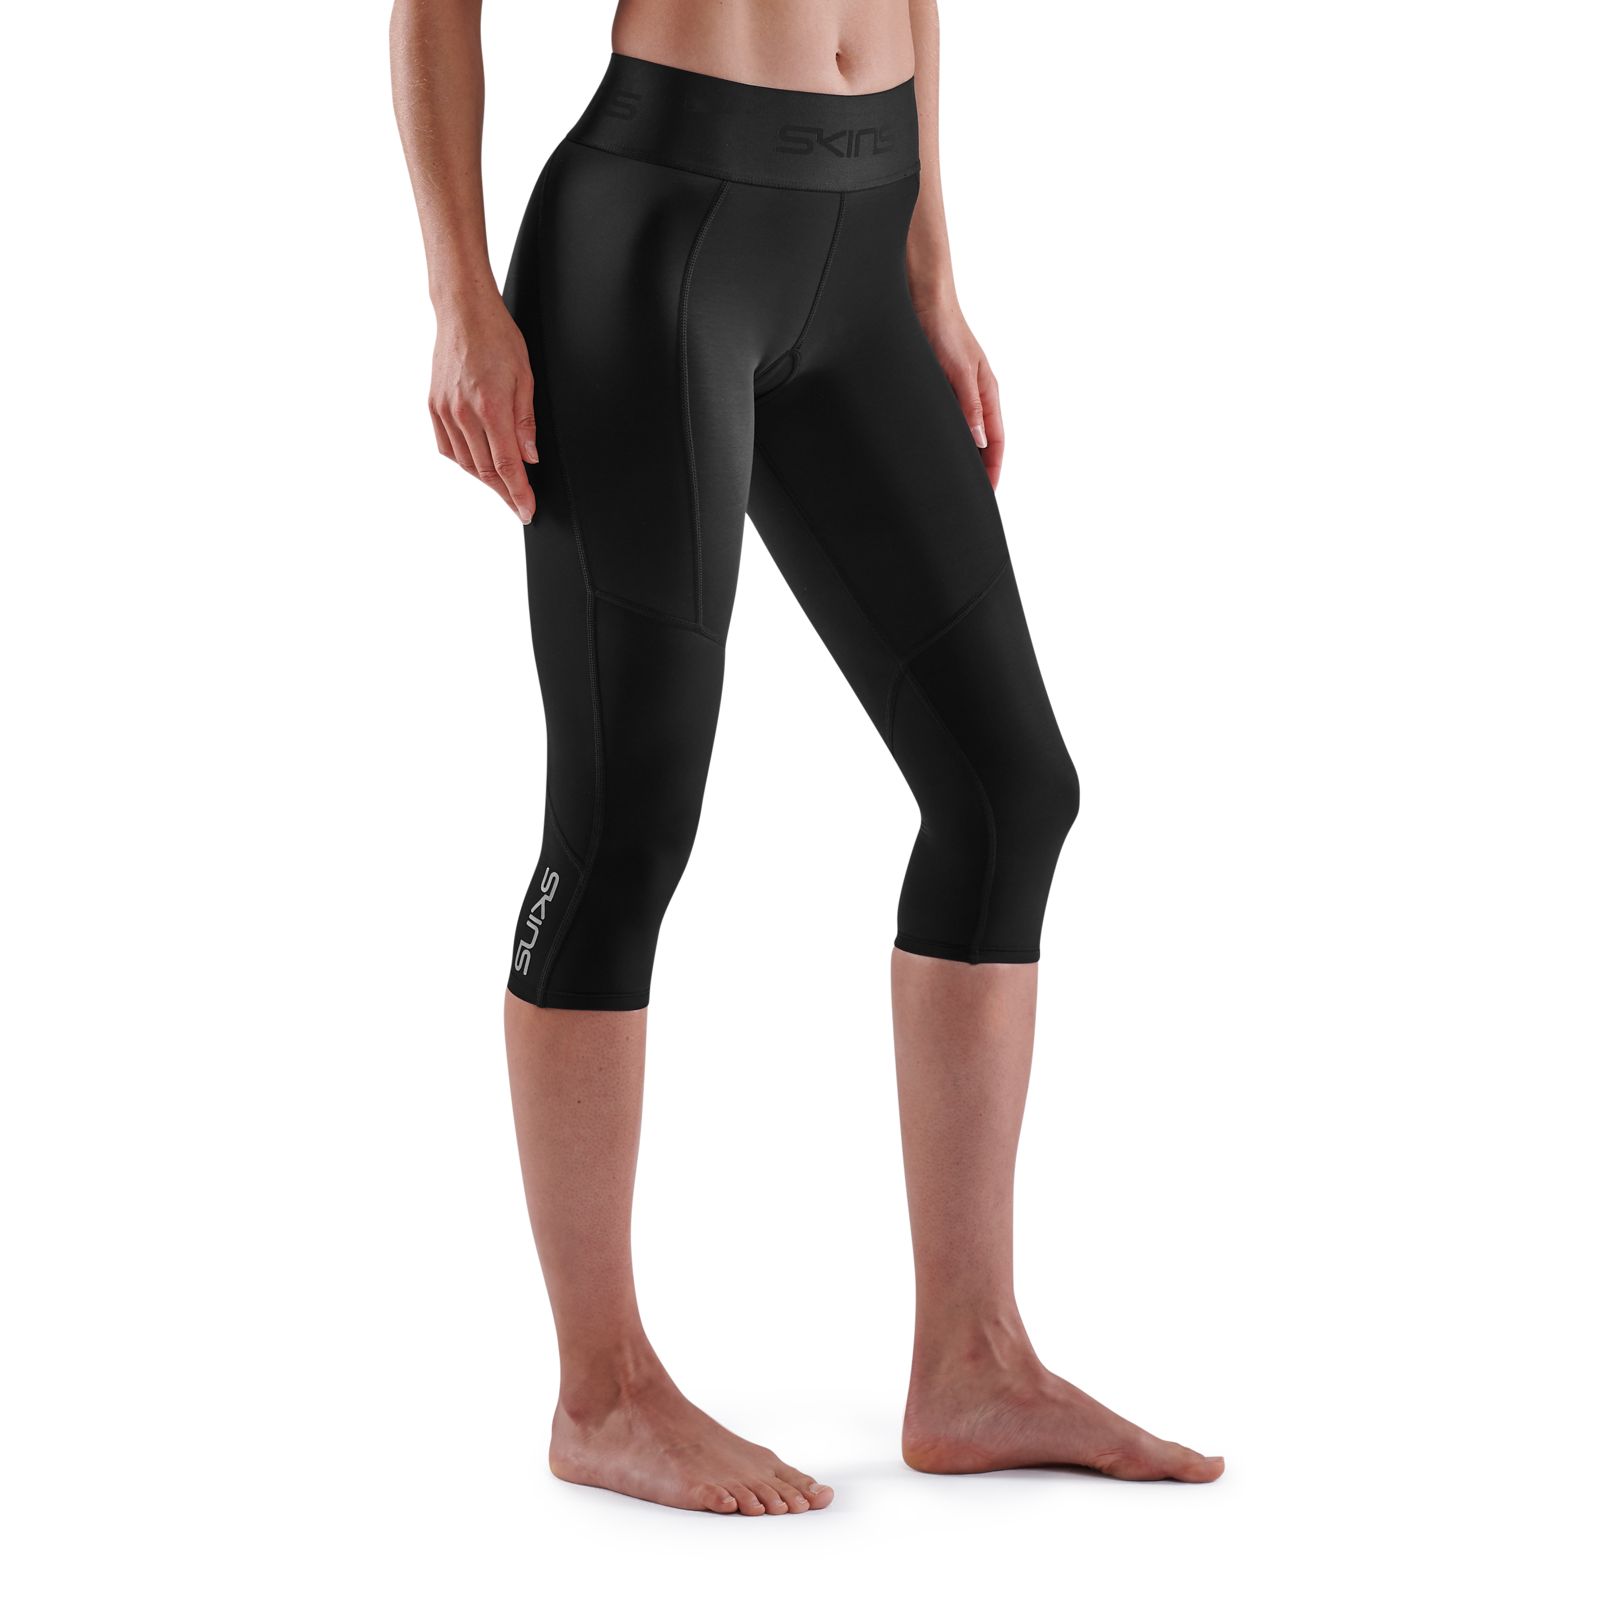 Emjay - SKINS A200 Women's Compression 3/4 Capri Tights - Abyss